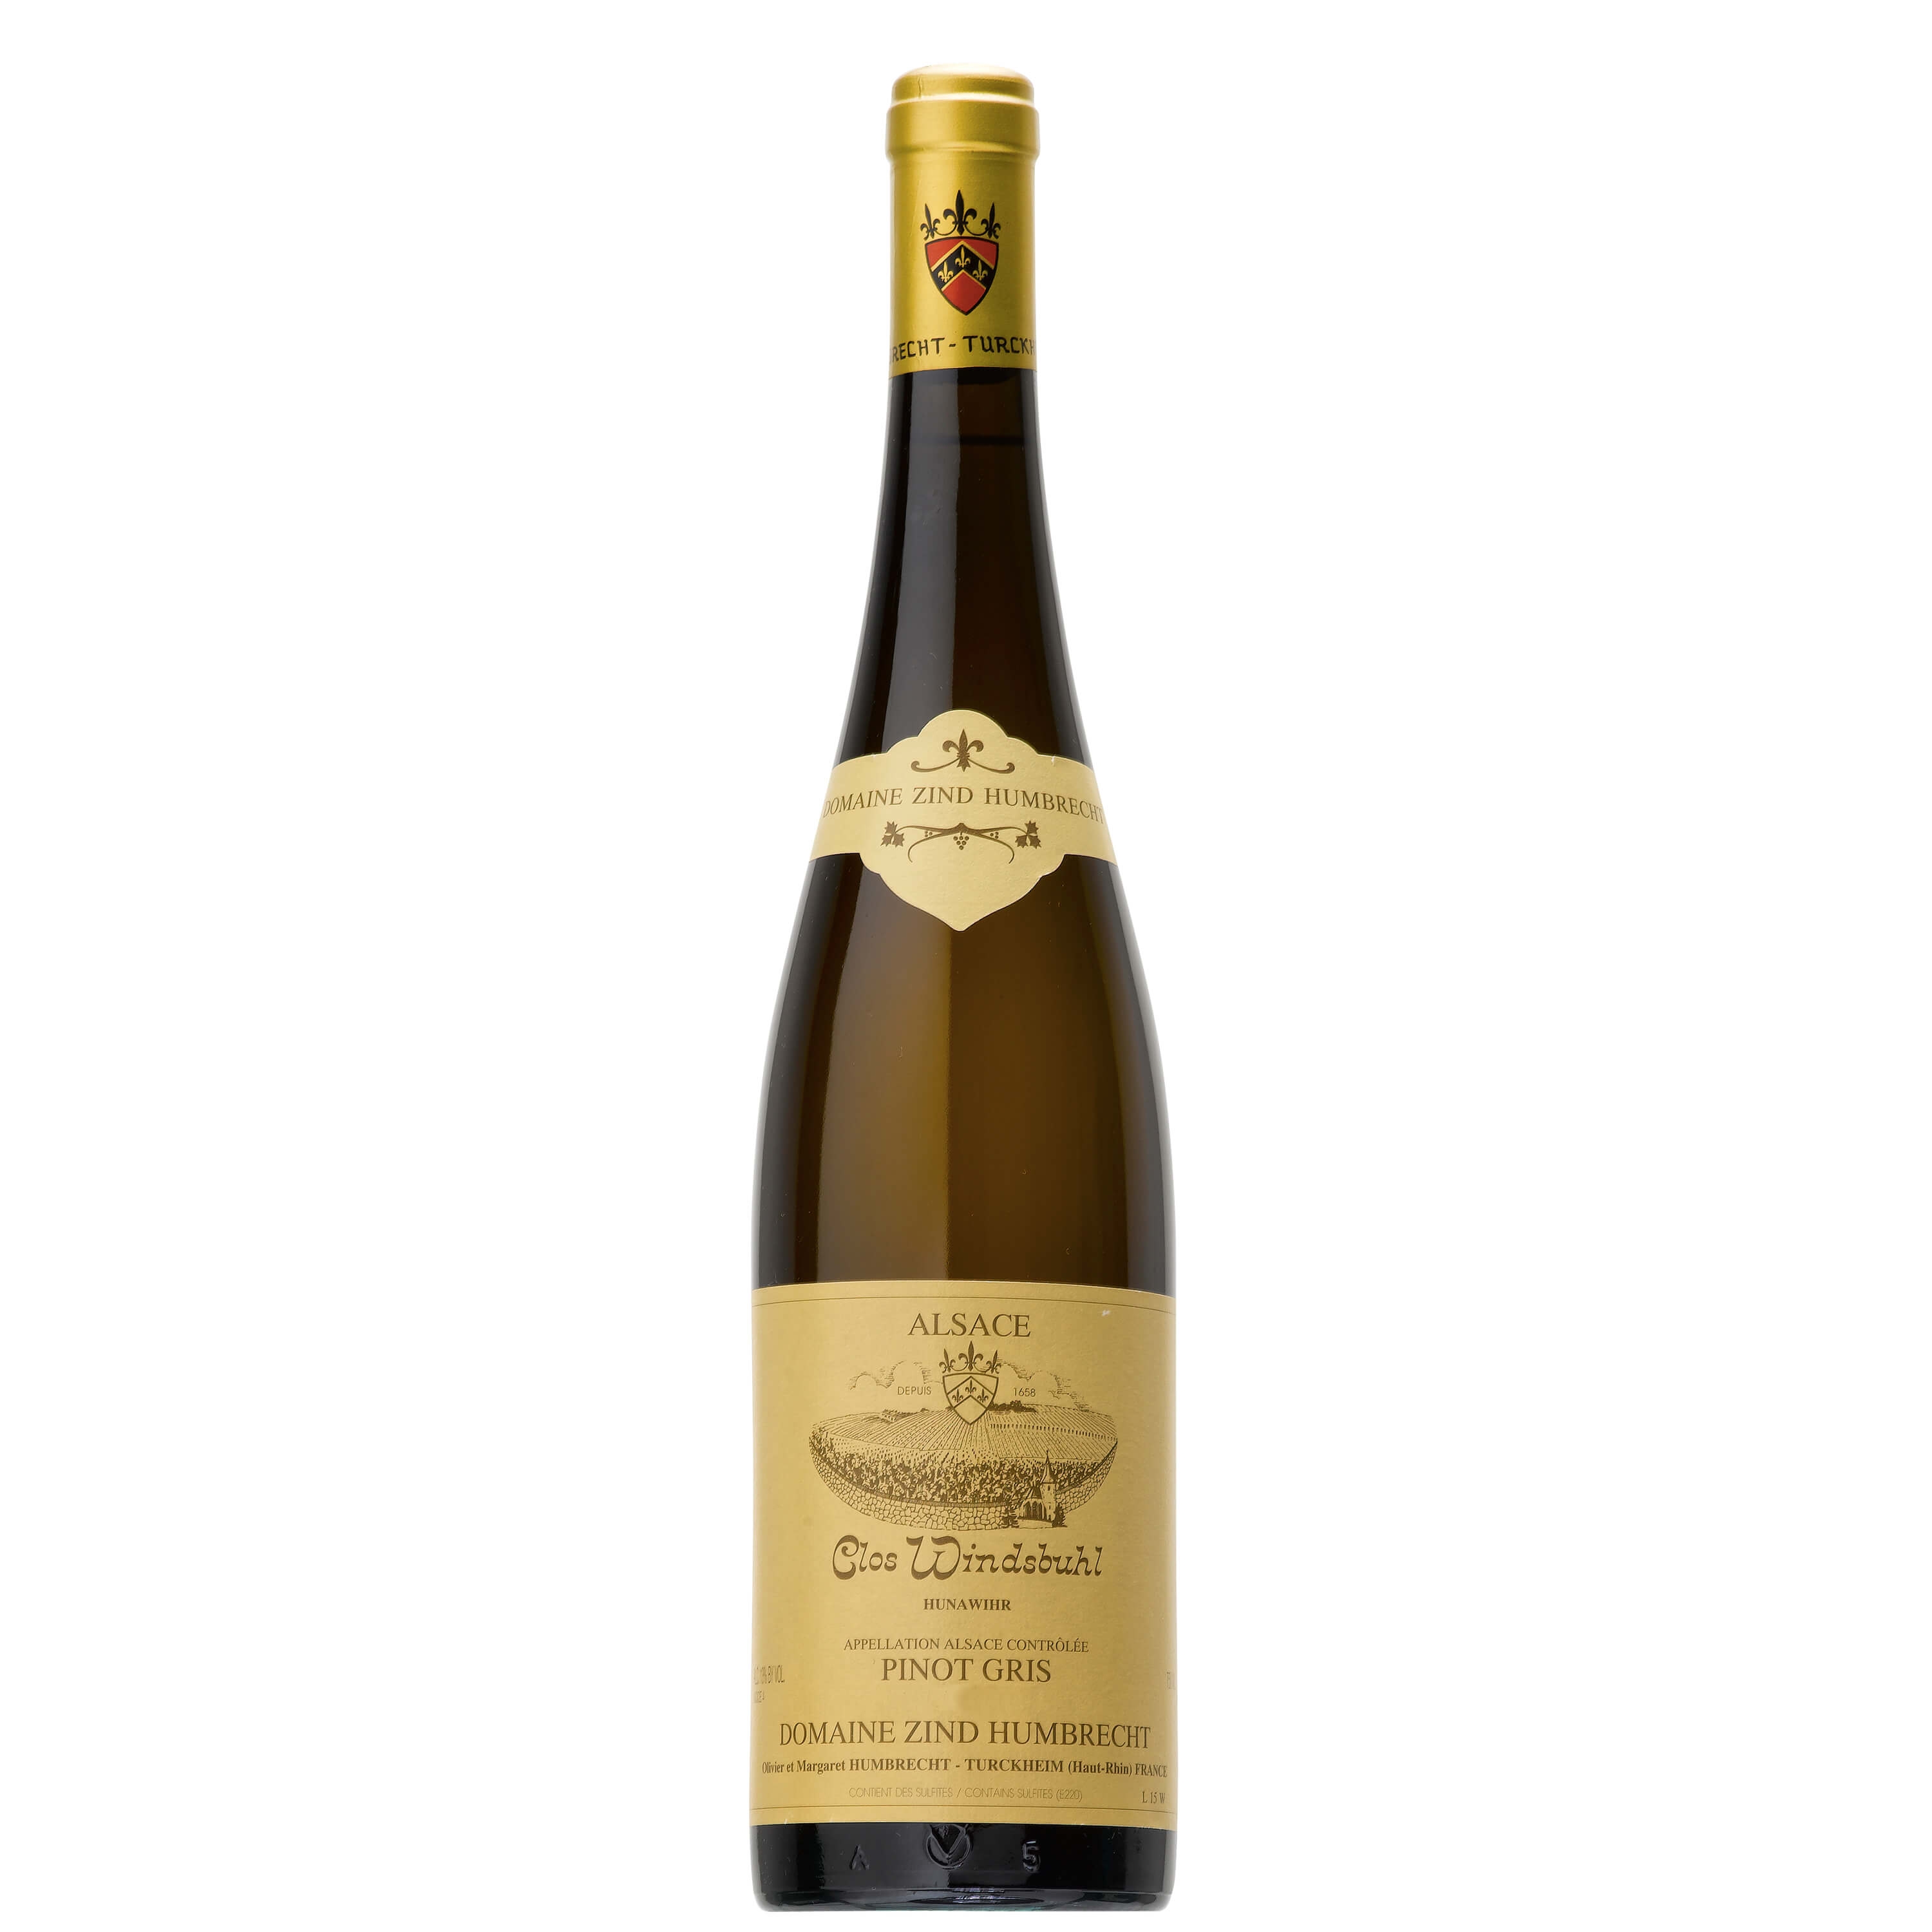 Alsace Pinot Gris Clos Windsbuhl 2002 28500 FR Tannico